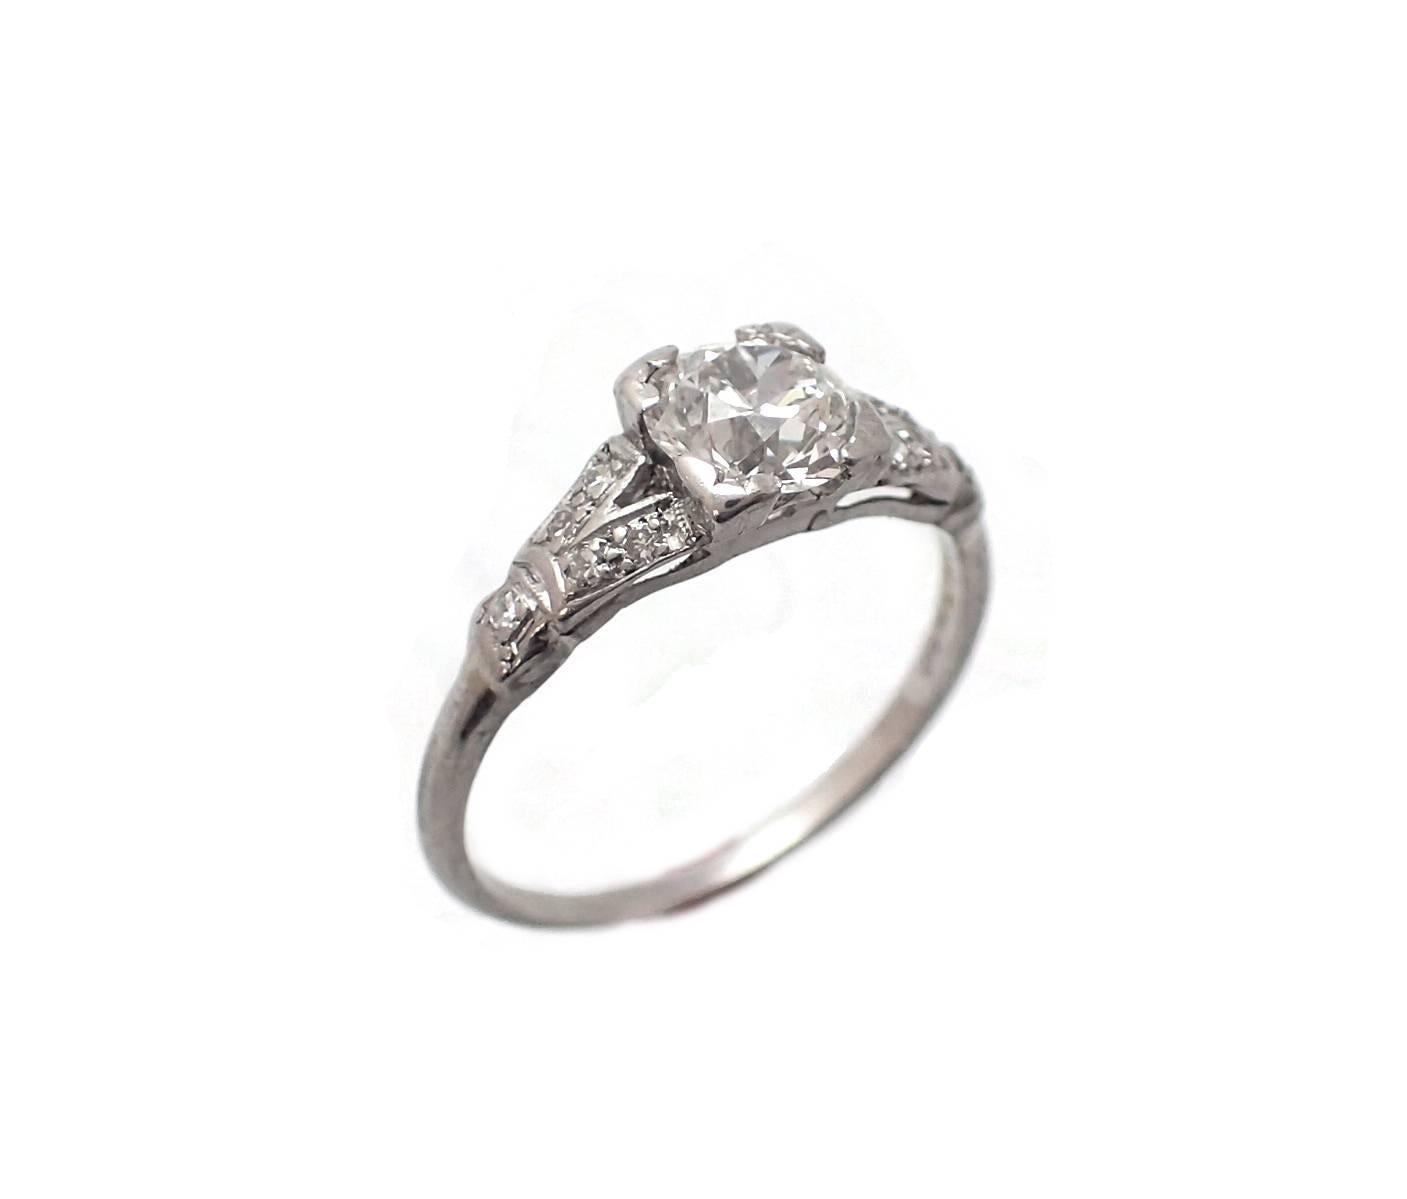 This Art-Deco Engagement ring features a .88ct round old mine cut, H color, VS clarity, that has its origins in a Tifany circle pin.  The mounting must be one of the original precursors to today's popular split shank style. Set in platinum.